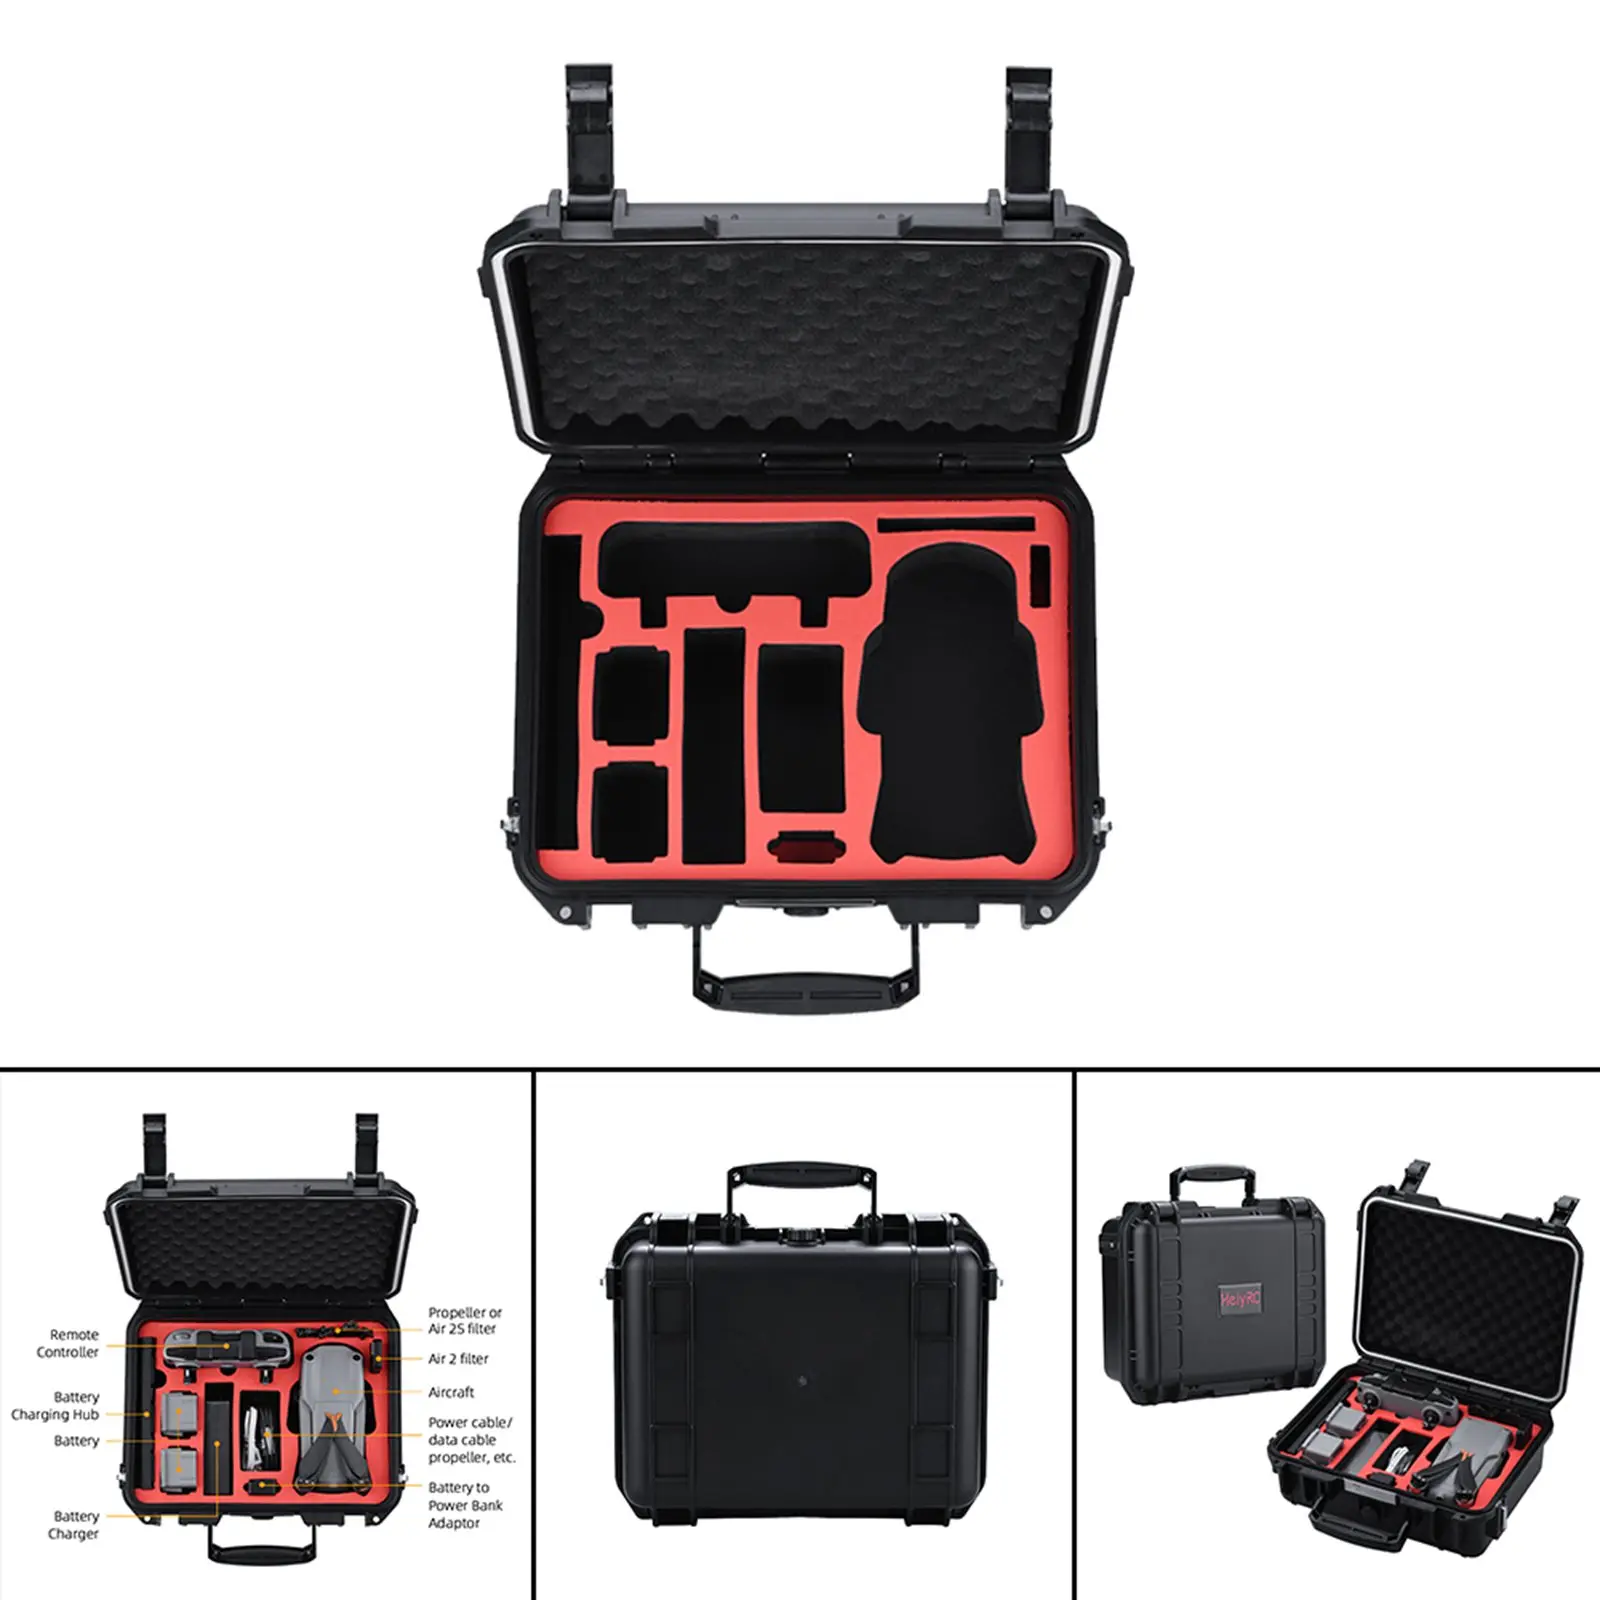 Portable Traveling Drone Hard Case Storage Shockproof Carrying Case Handbag for DJI Mavic Air 2S Accessories